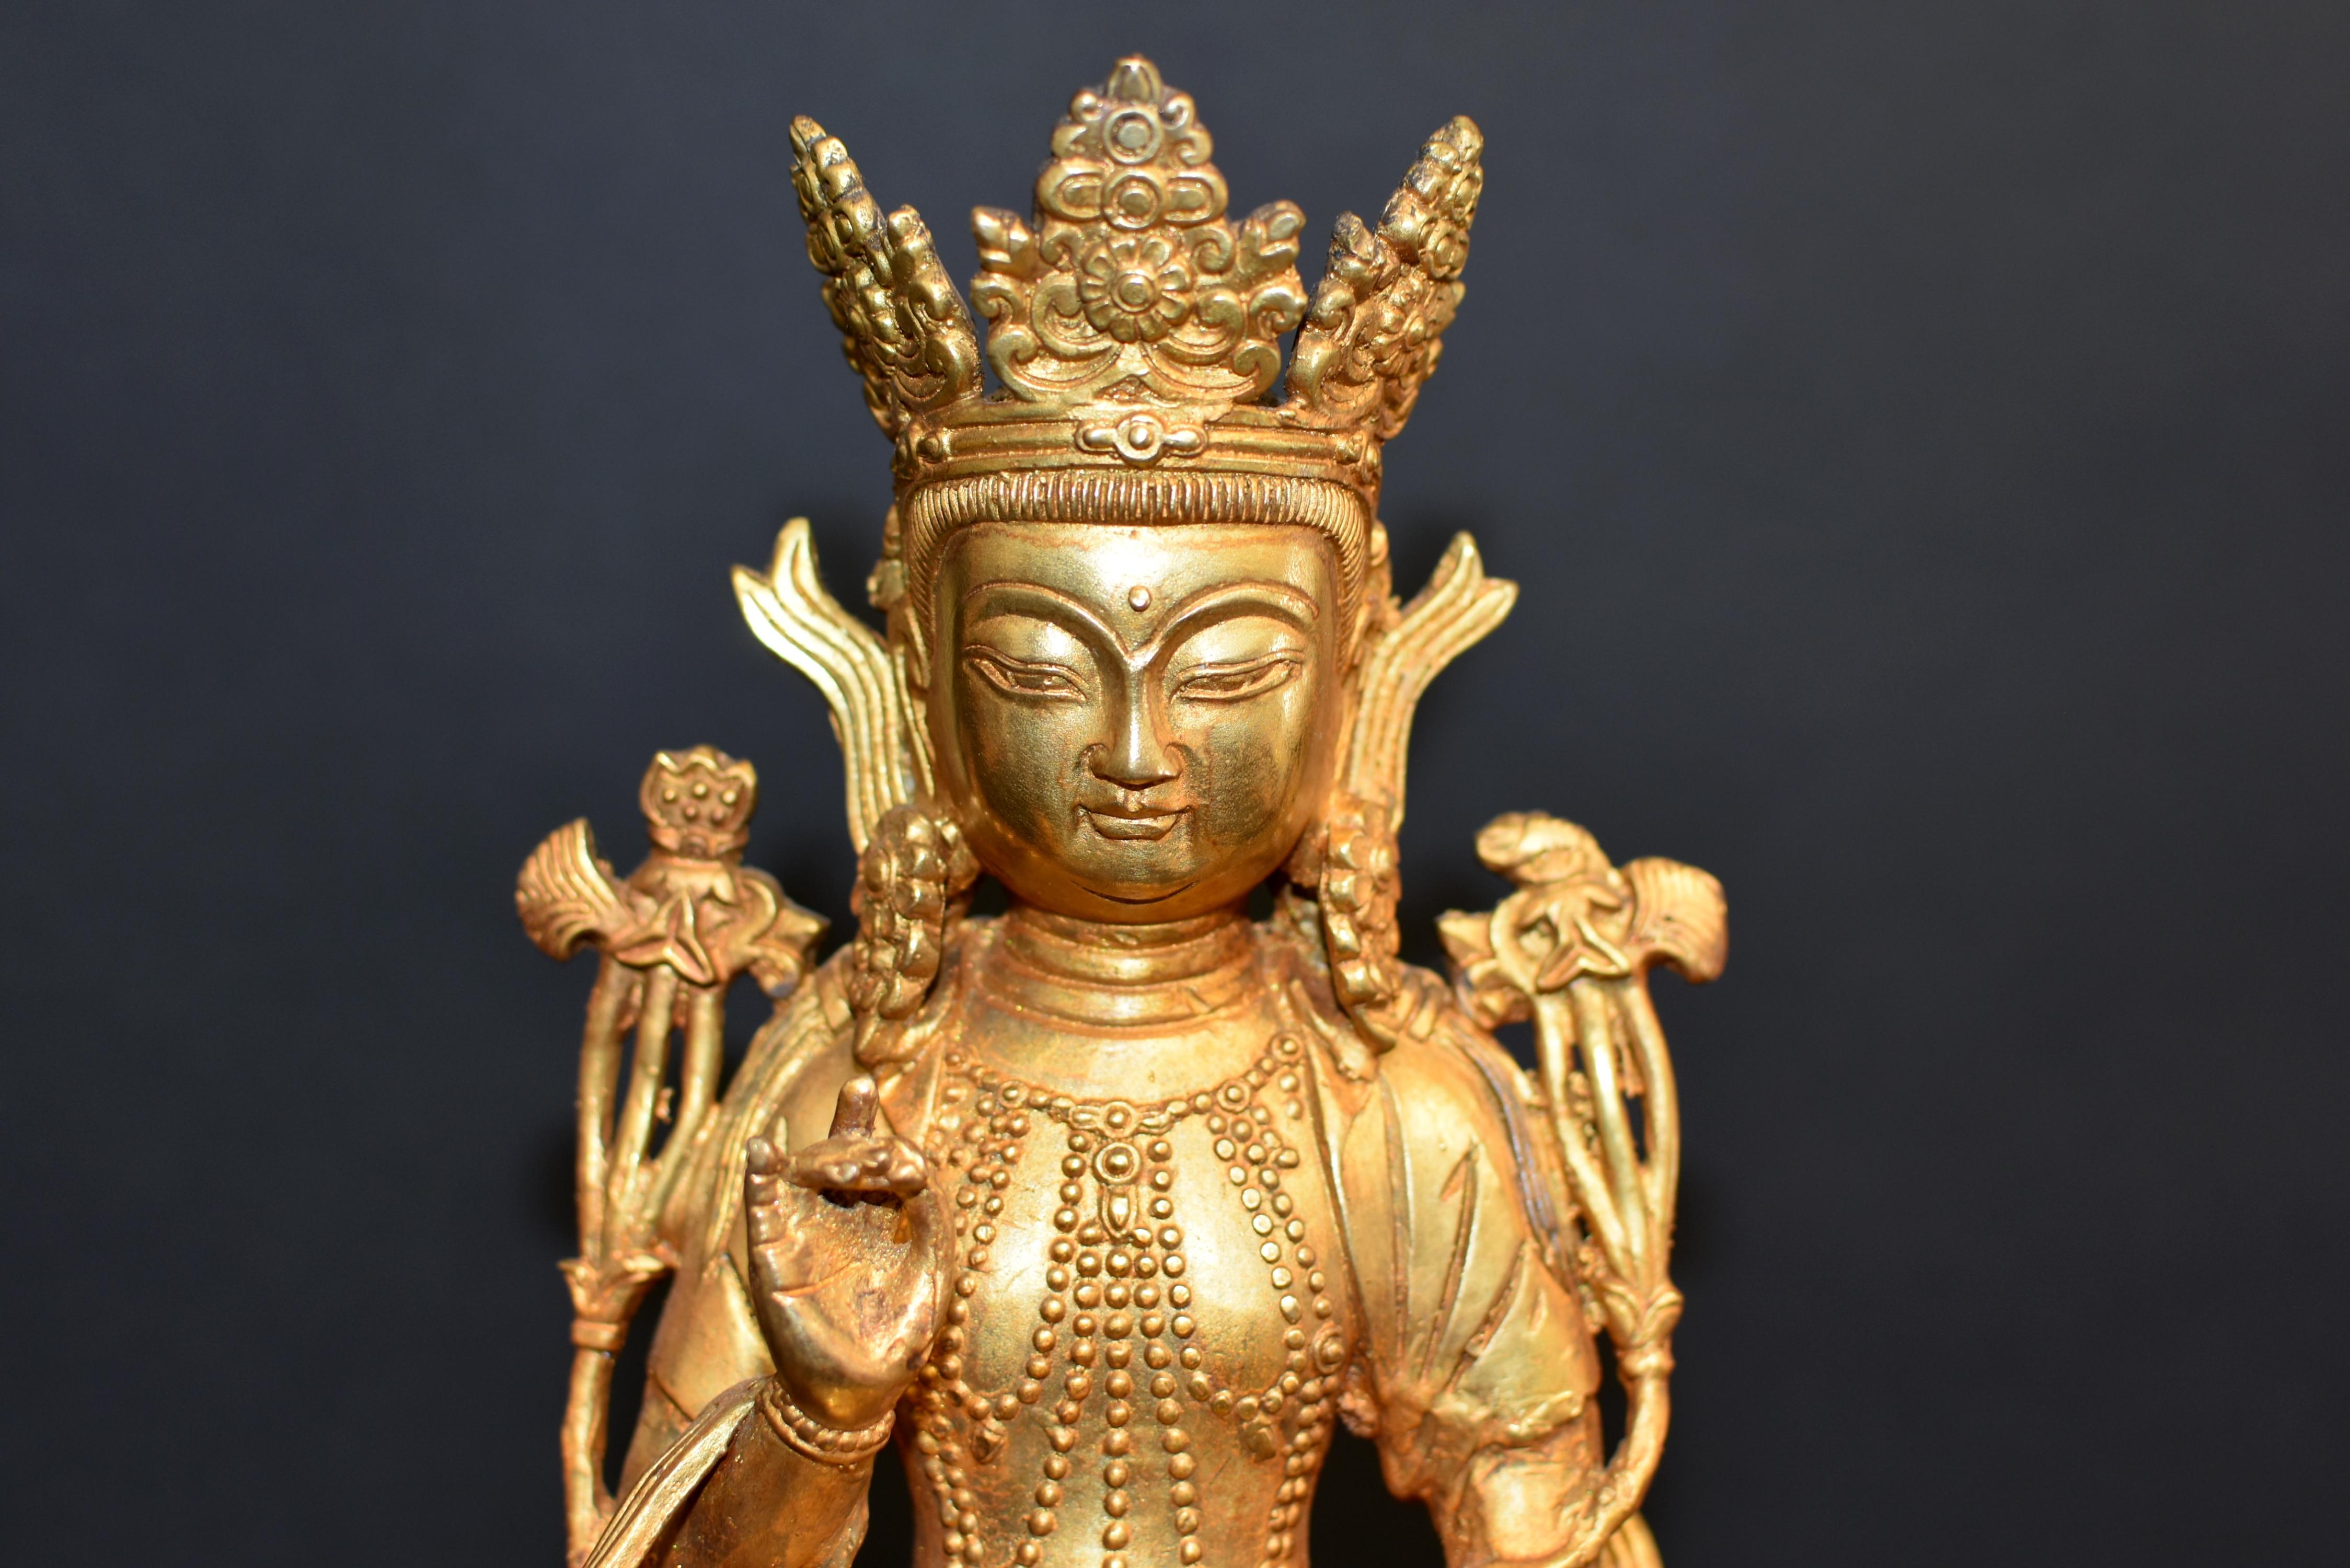 A beautiful 10 lb, gilt bronze statue of Tibetan White Tara. Seated in dhyanasana on a 4-tier lotus pedestal rising above holy beast on padmasana (single petal row lotus throne), both hands in Karana mudra to expel evils. Her small exquisite face